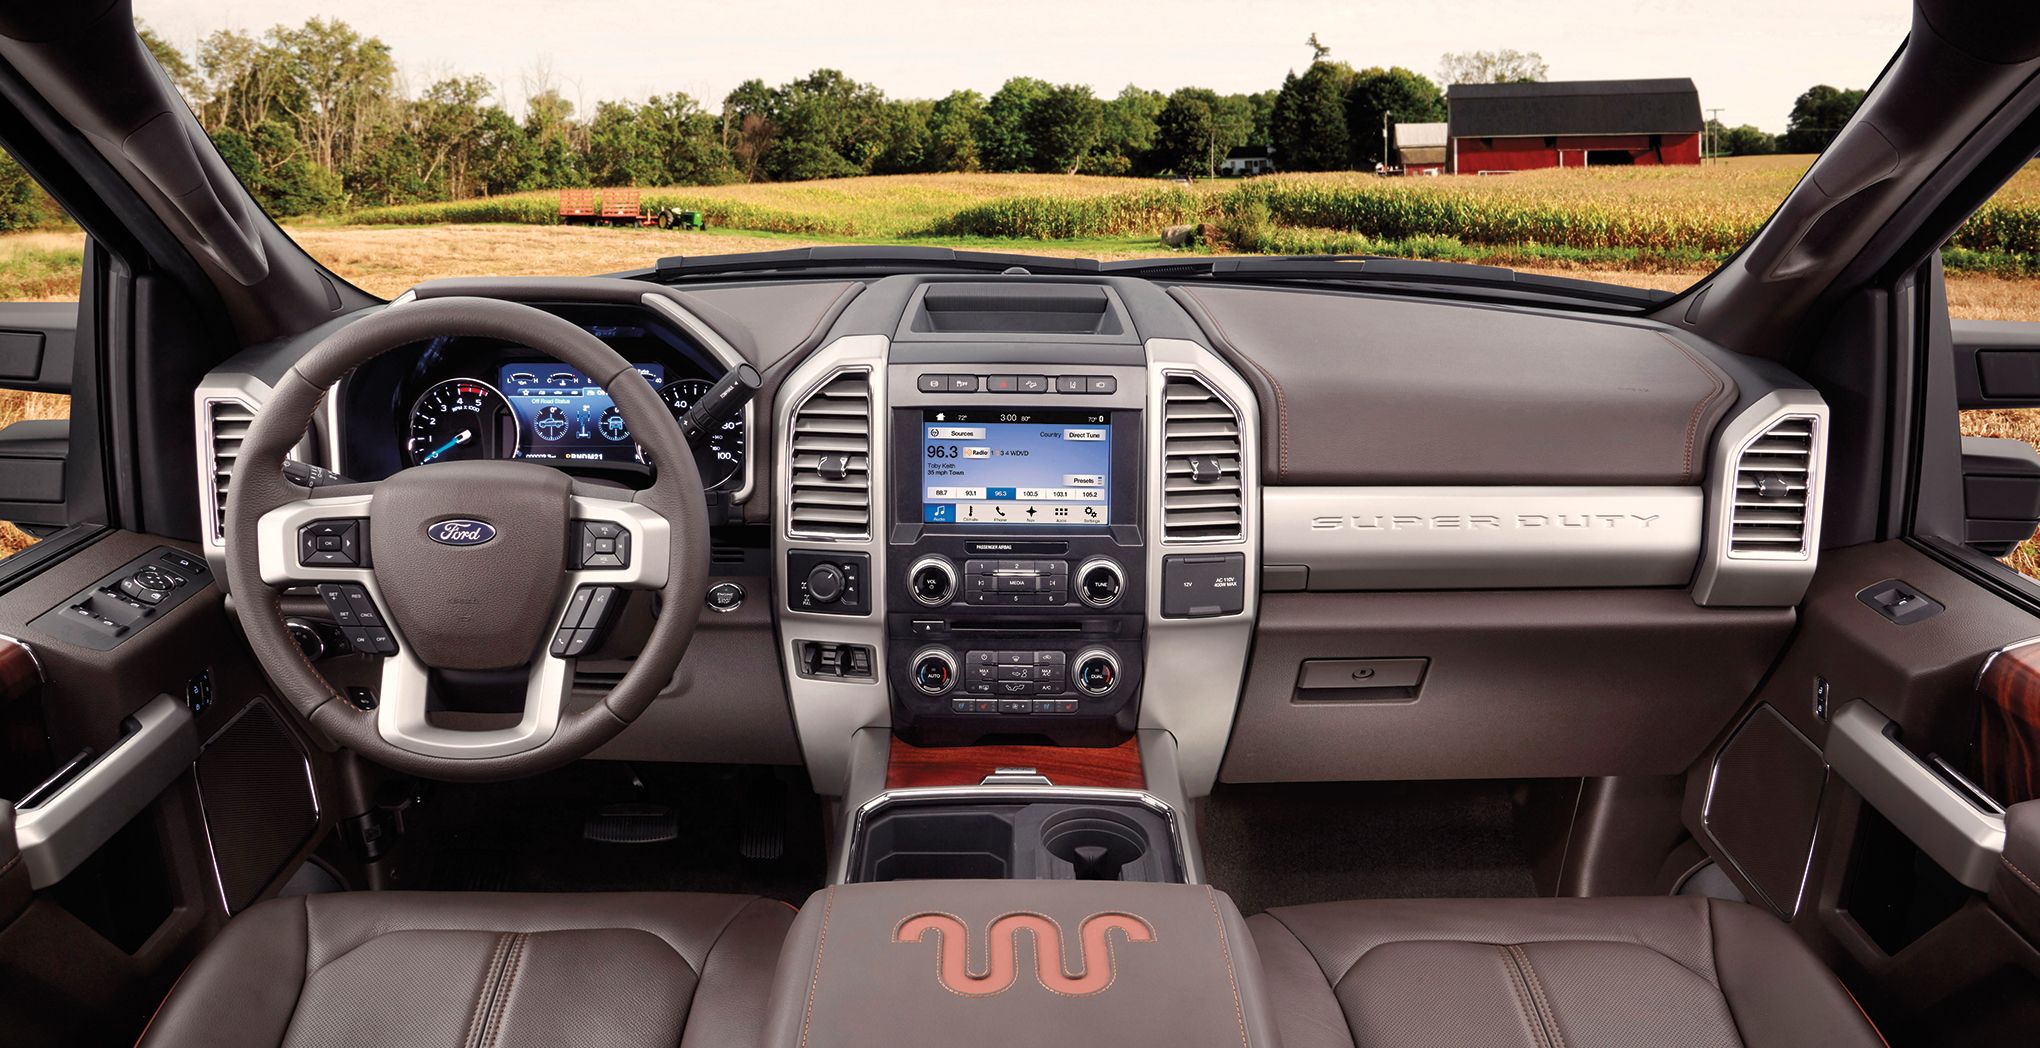 Ford S 2017 Super Duty Features The Quad Barreled Cupholder